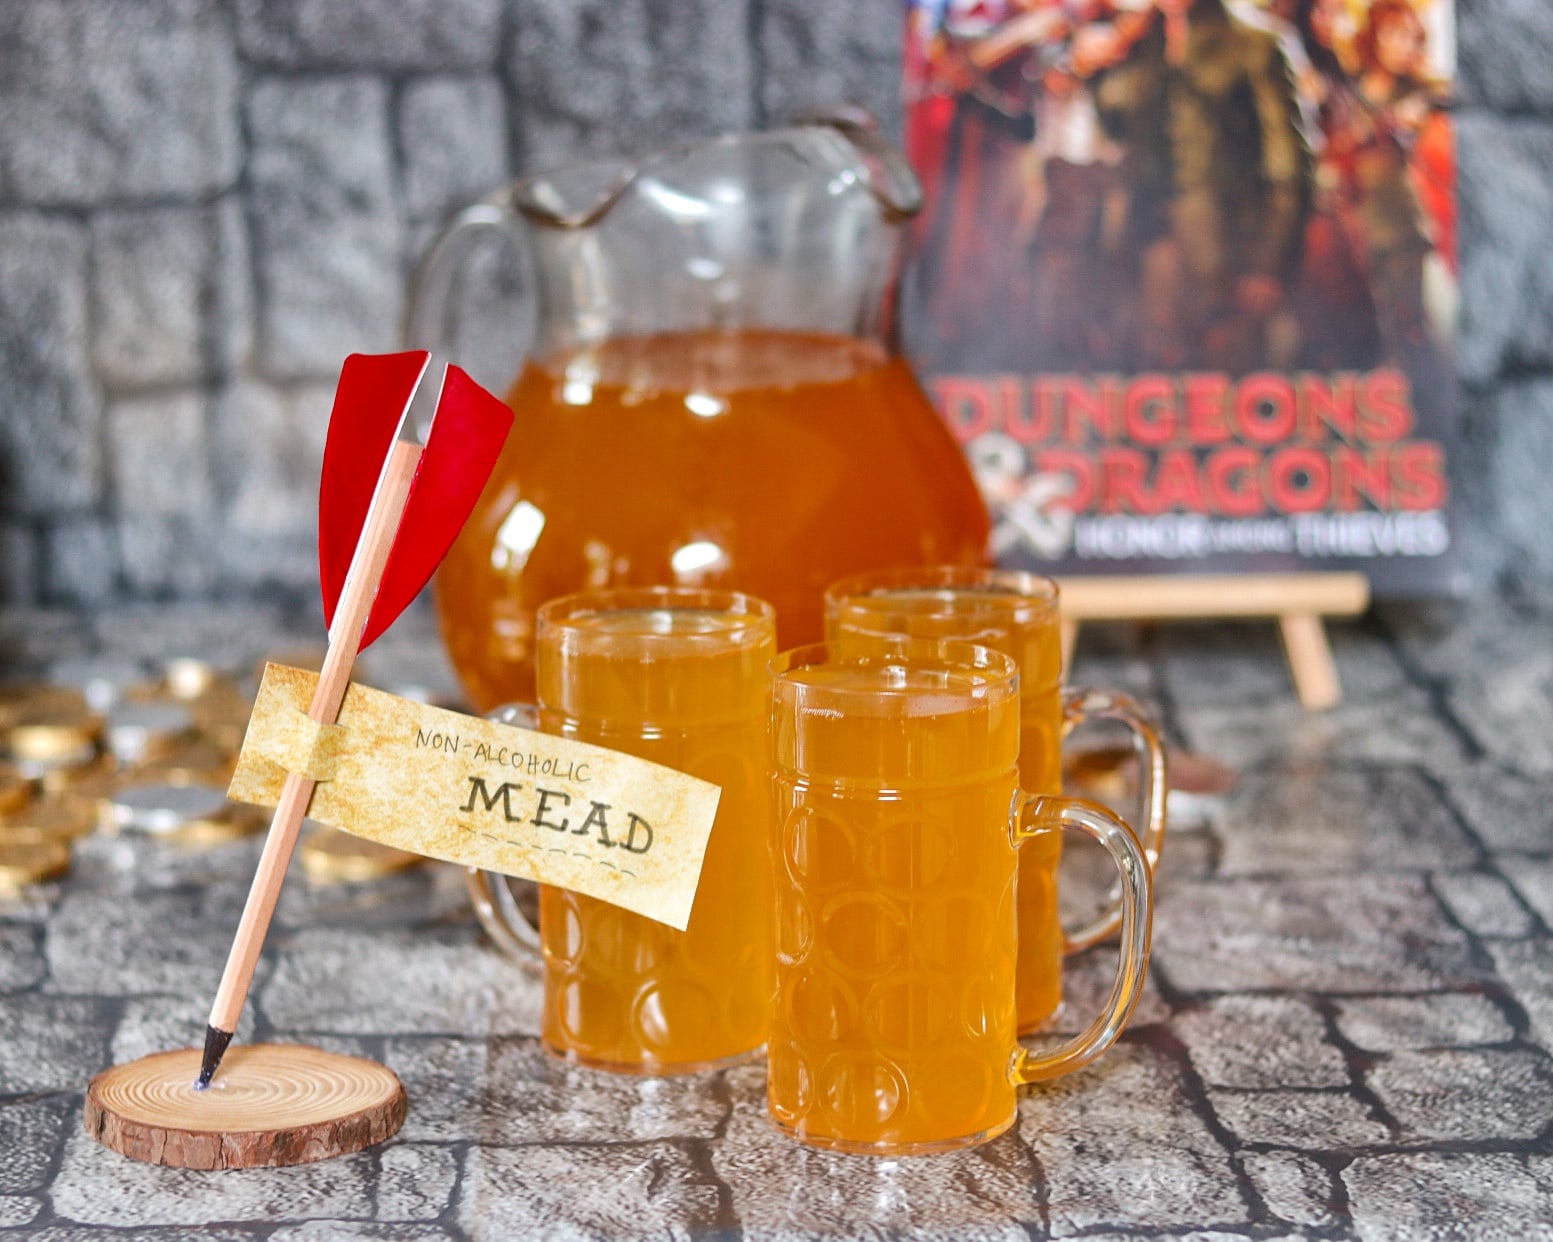 Dungeons and Dragons themed food: Non-Alcoholic Mead